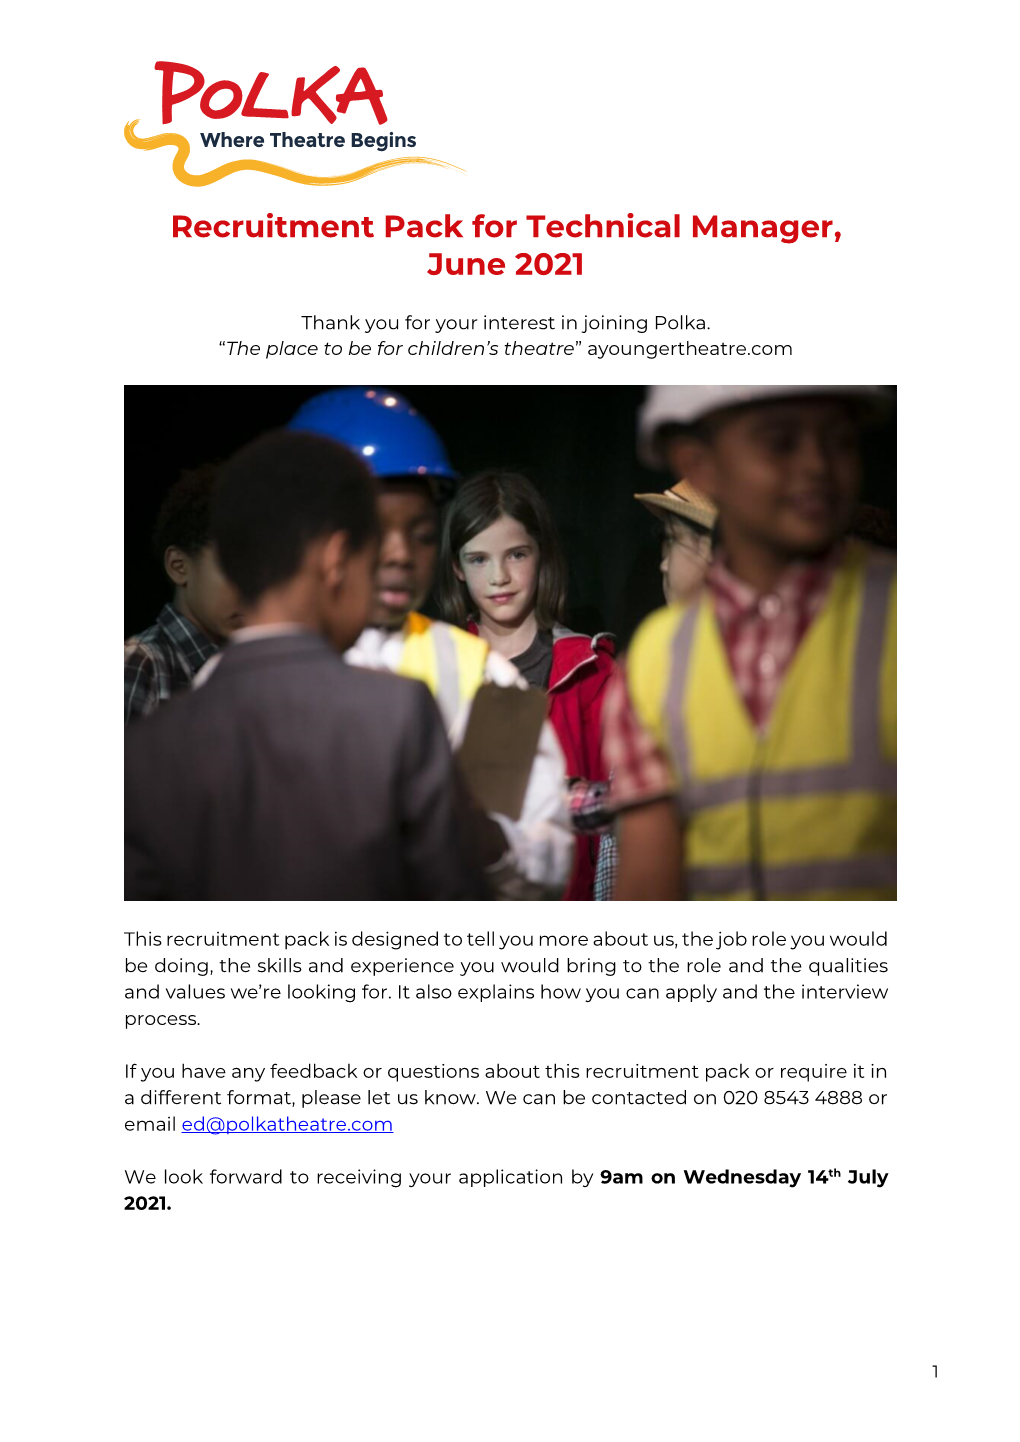 Recruitment Pack for Technical Manager, June 2021